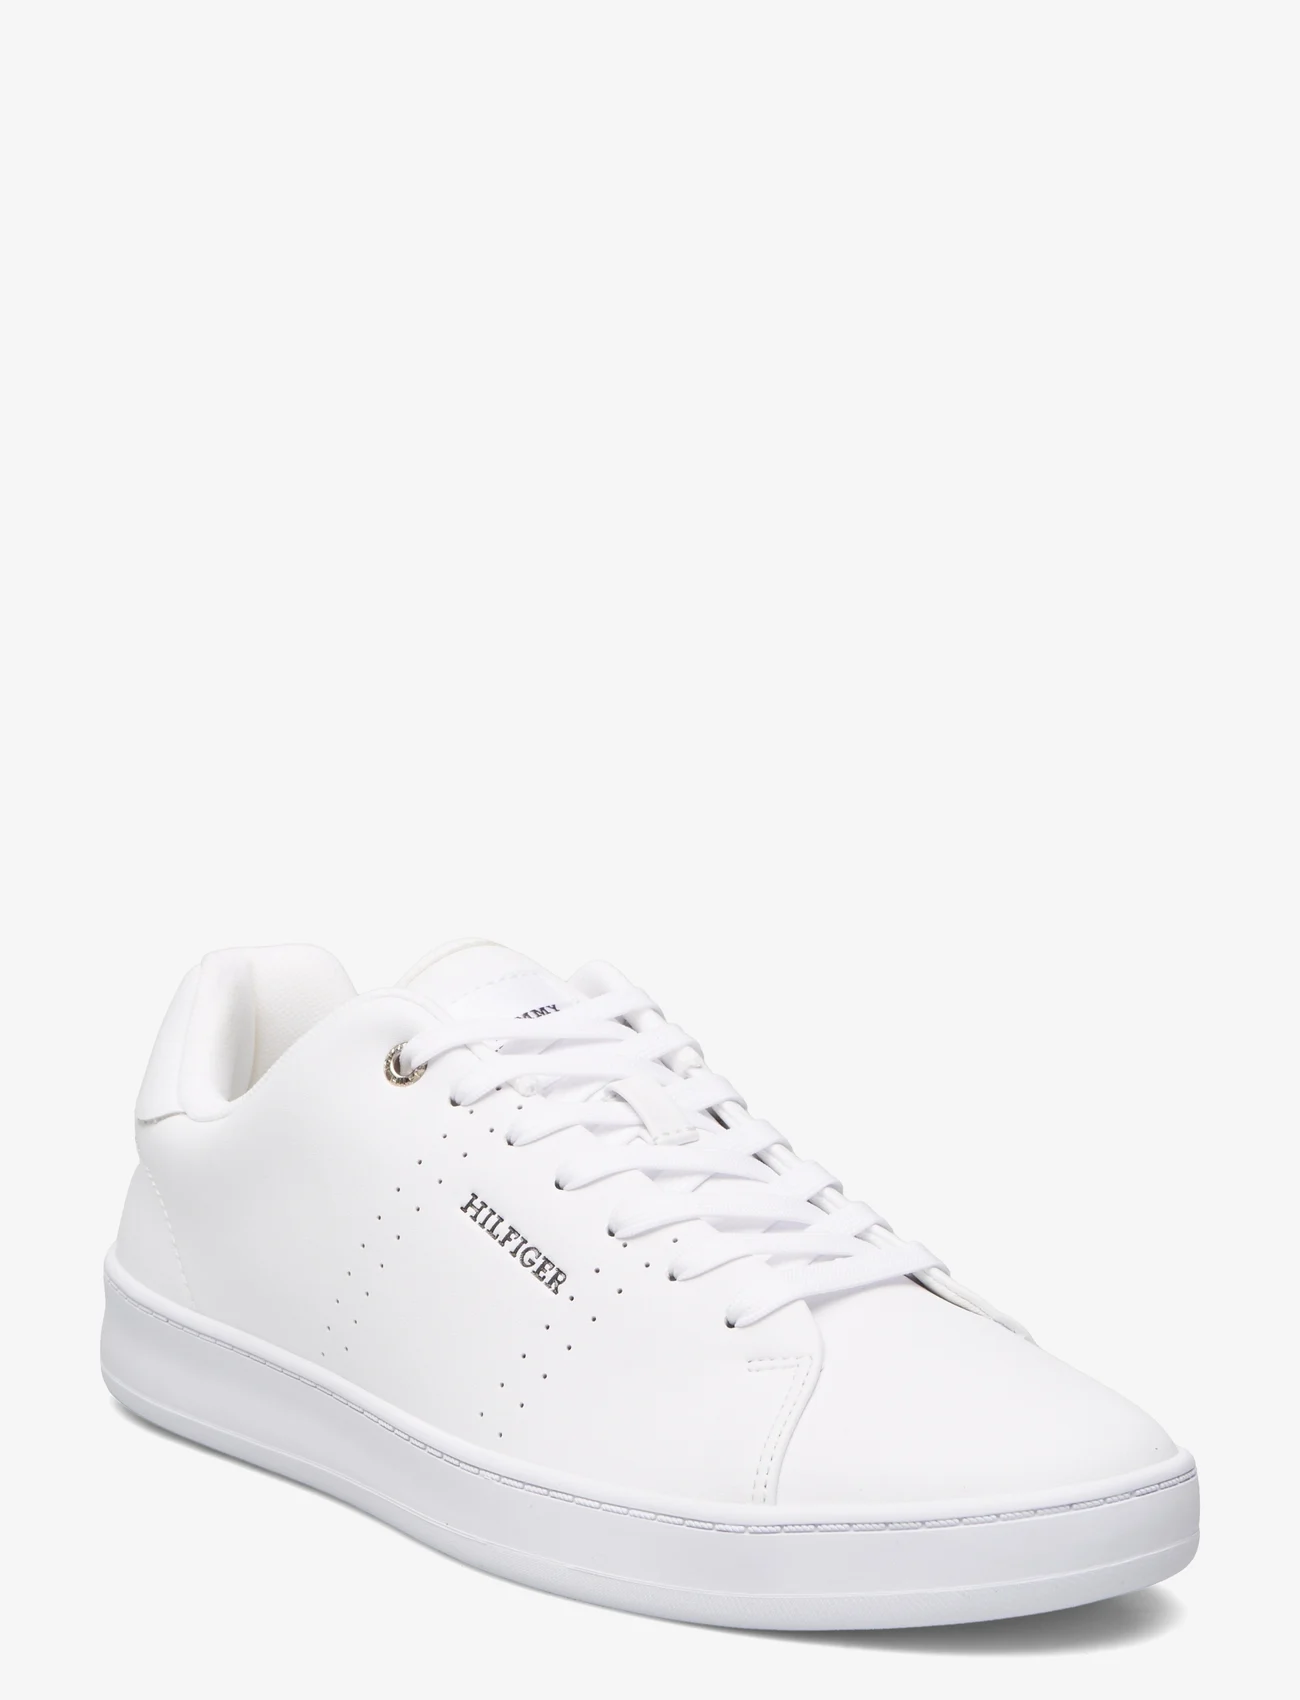 Tommy Hilfiger - COURT CUPSOLE RWB LTH - lave sneakers - white - 0